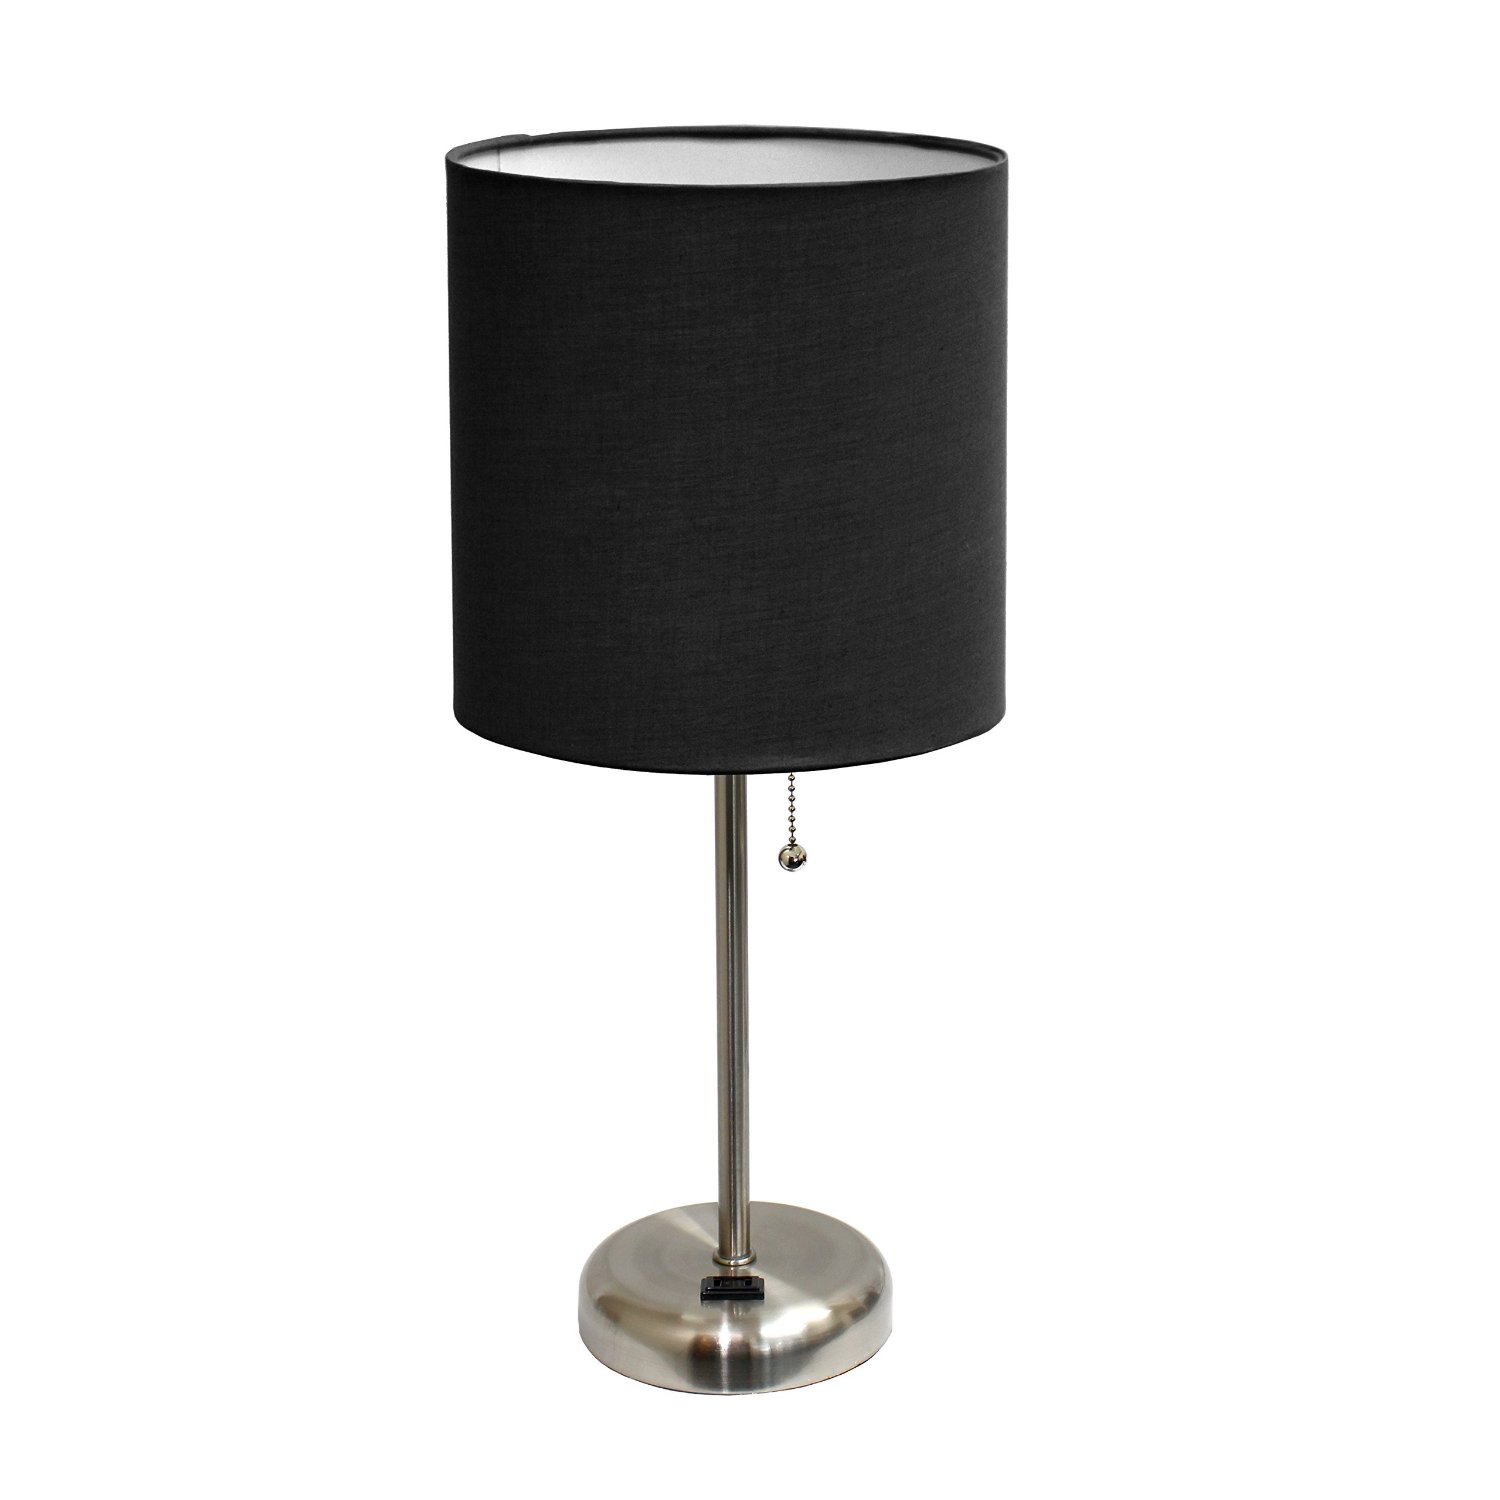 LimeLights Stick Lamp with Charging Outlet and Fabric Shade